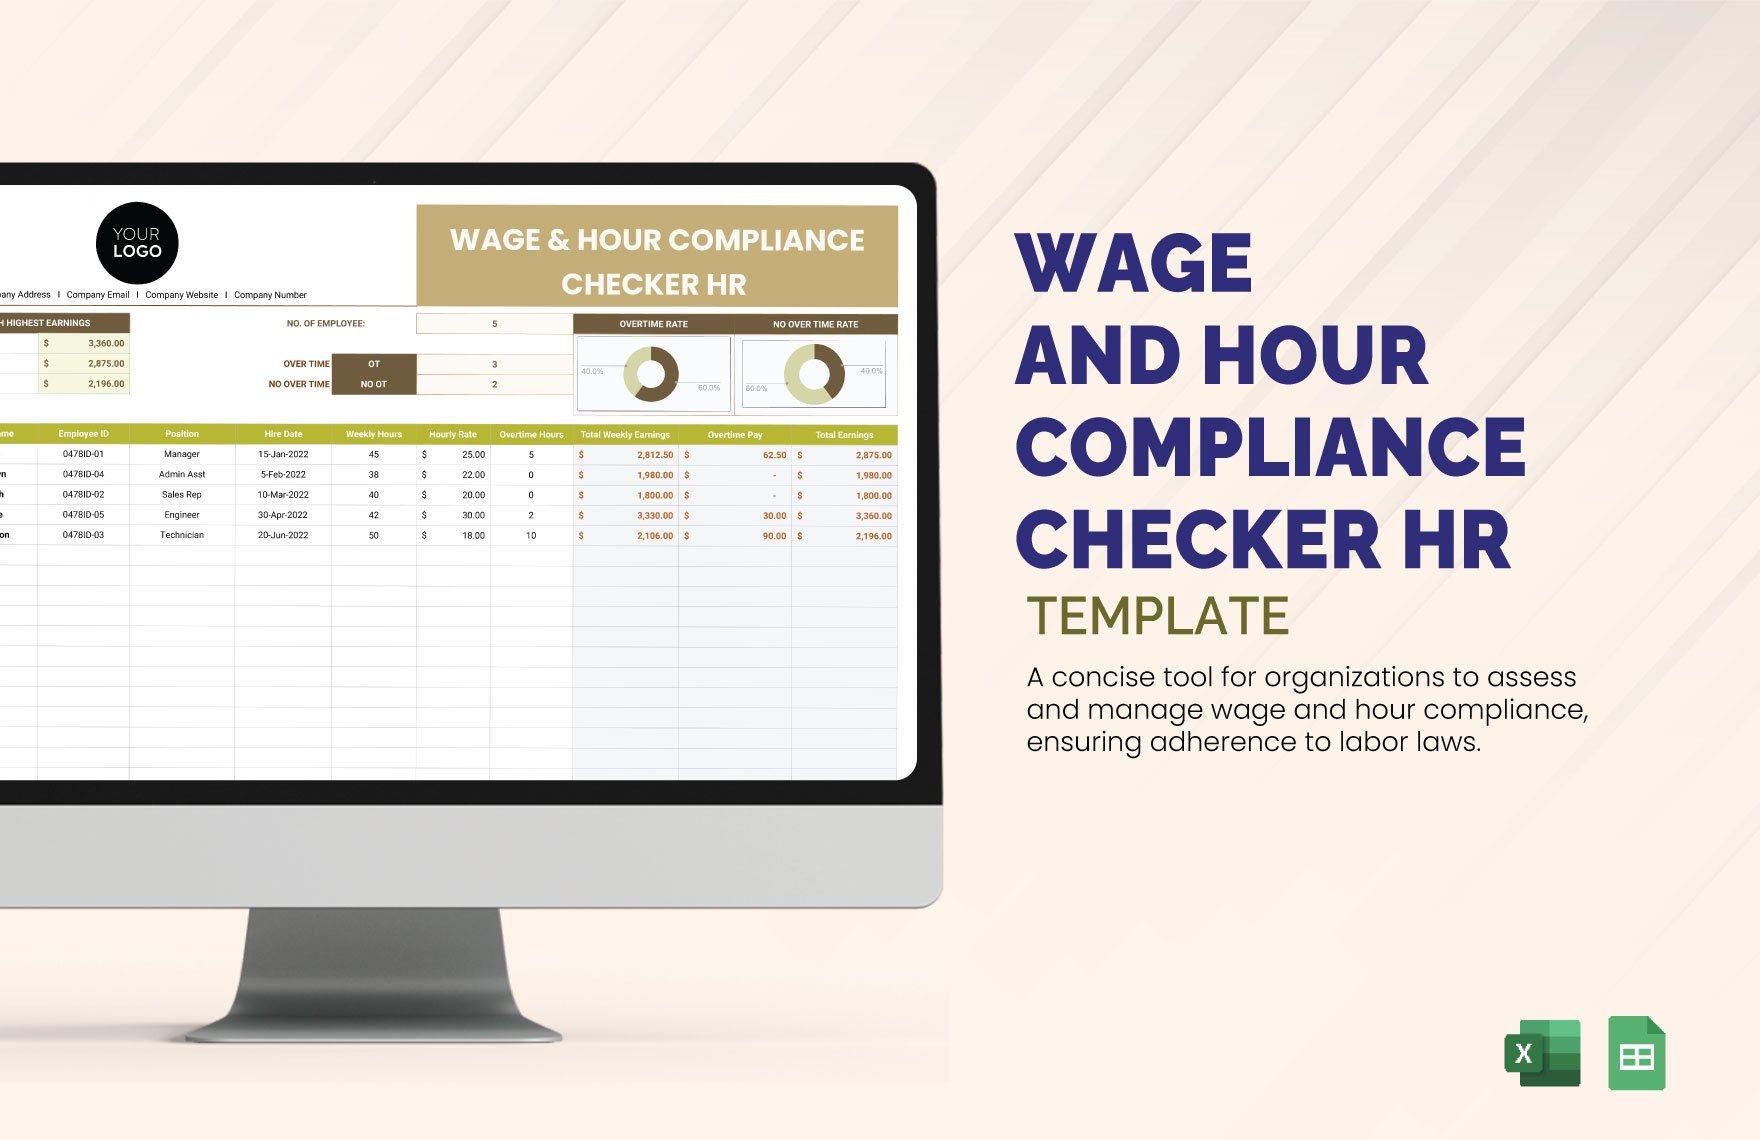 Wage and Hour Compliance Checker HR Template